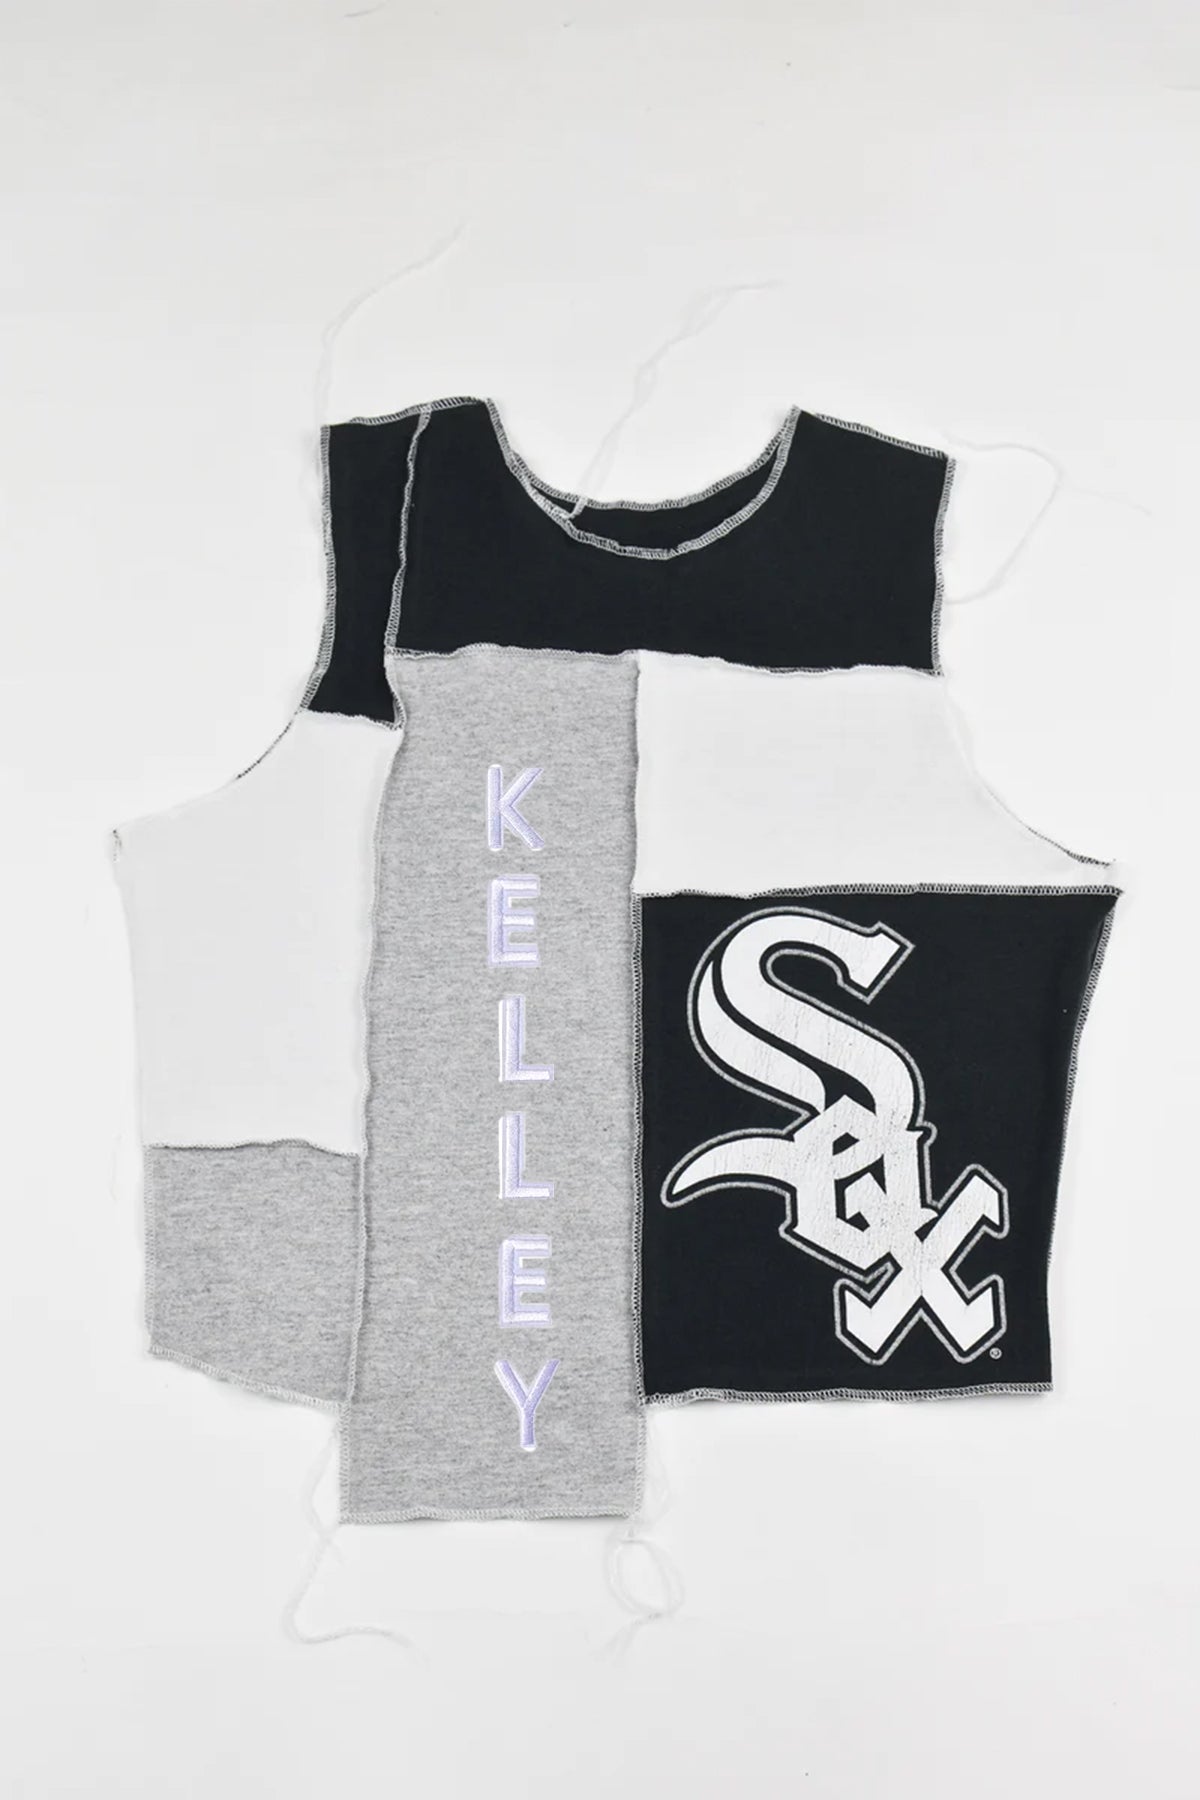 Upcycled White Sox Scrappy Tank Top for Julianna